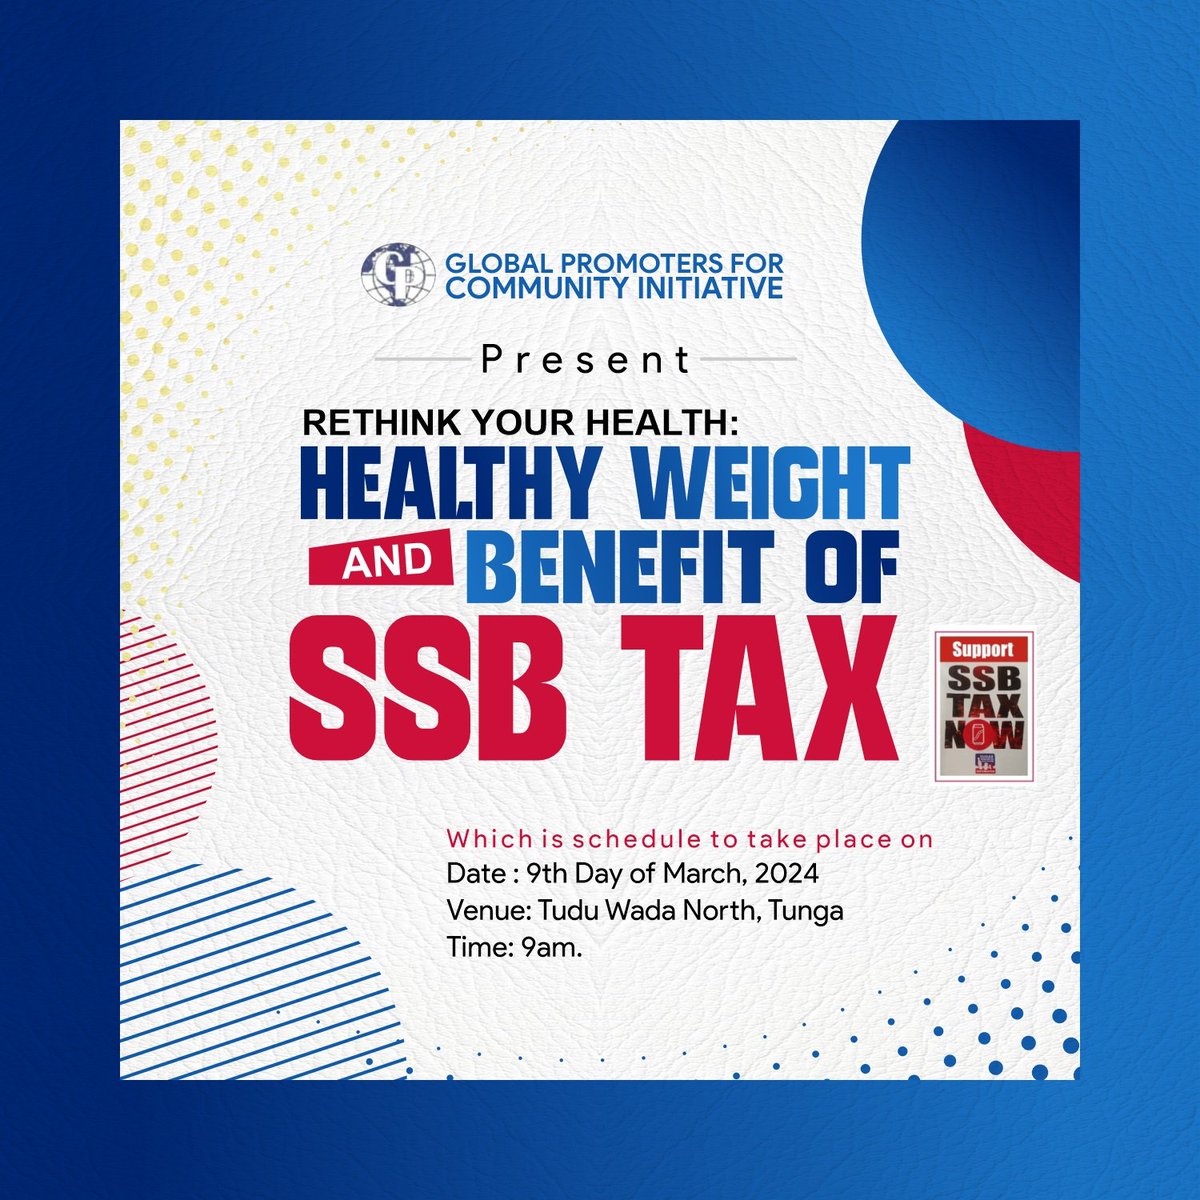 As we r celebrating IWD,don't let us ignore a healthy living. Your health determines how far u will go on earth. Let us rethink our health for a healthy weight. @CAPPAfrica @ZamfaraNewMedia @WHONigeria @nighealthwatch. Join us tomorrow as we discuss the benefit of SSB Tax.